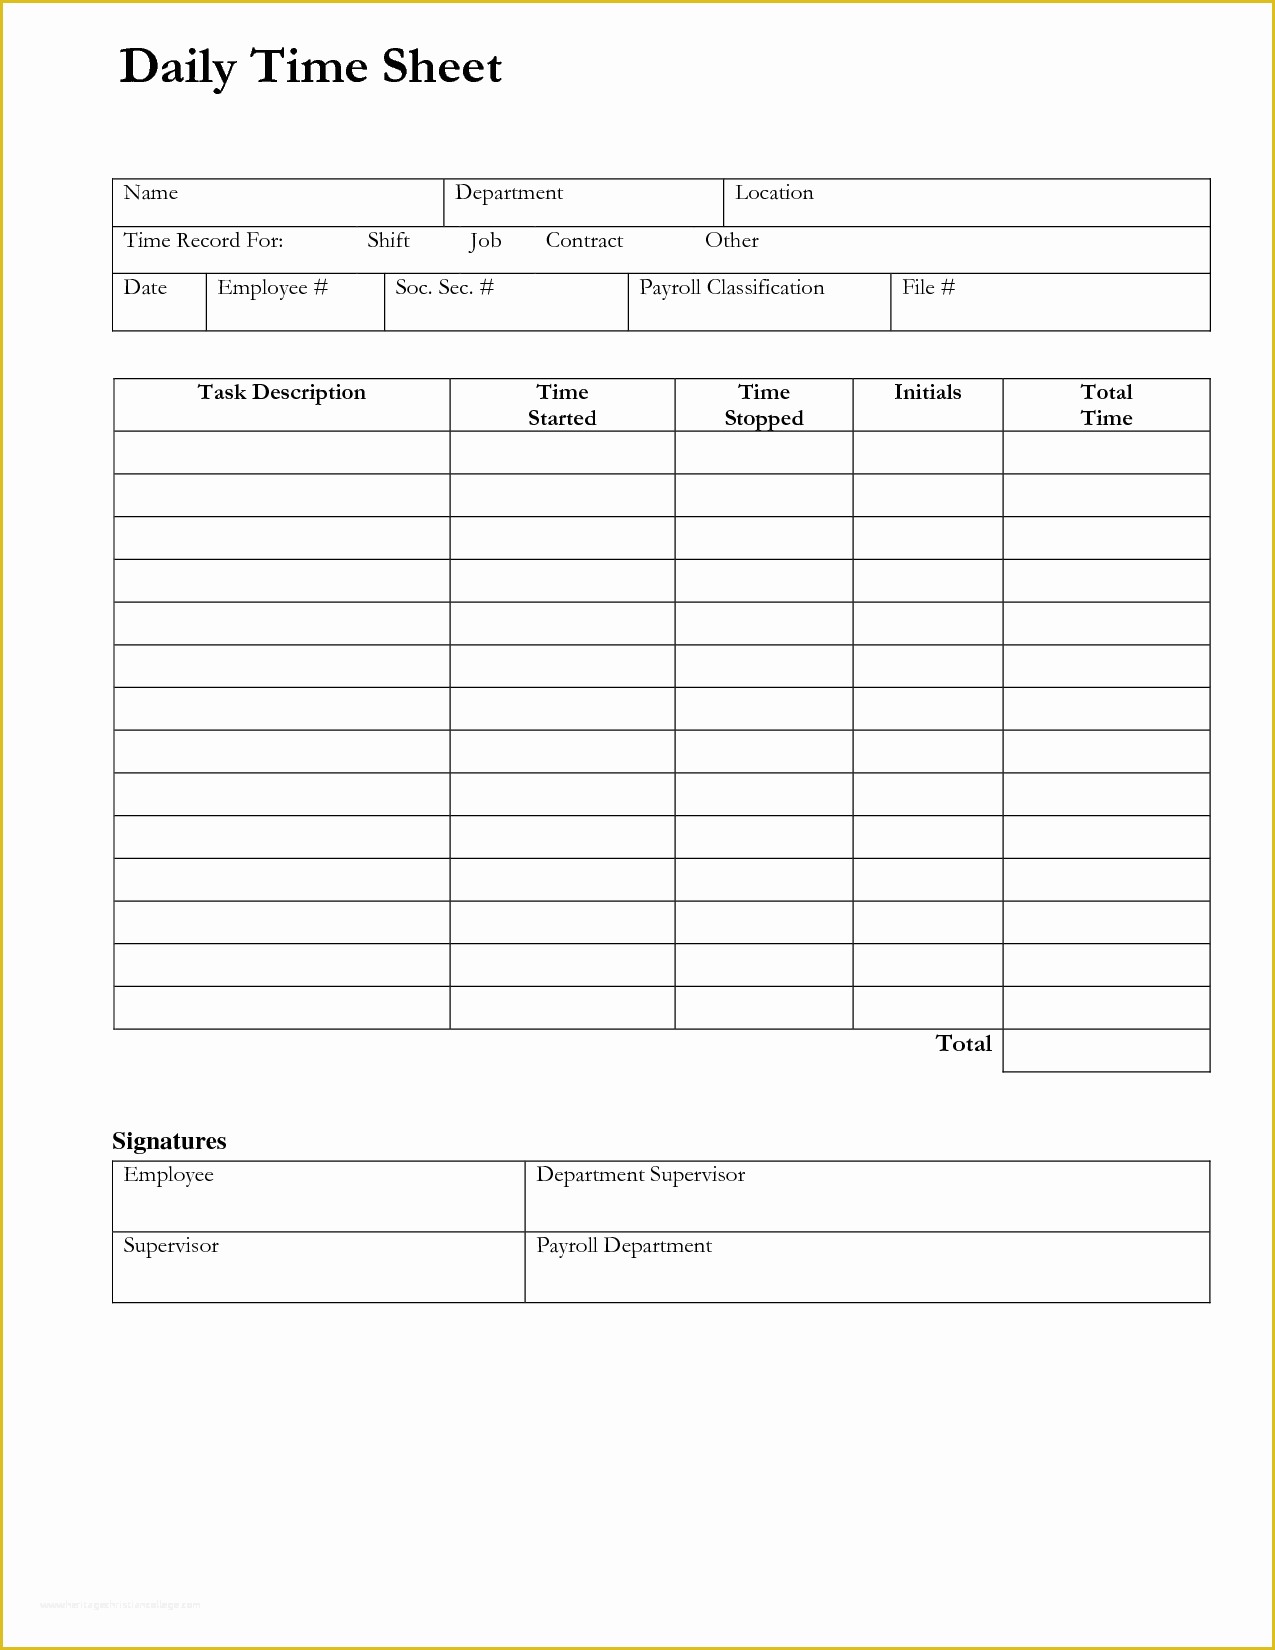 Timesheet Template Free Printable Of Daily Time Sheet Printable Printable 360 Degree